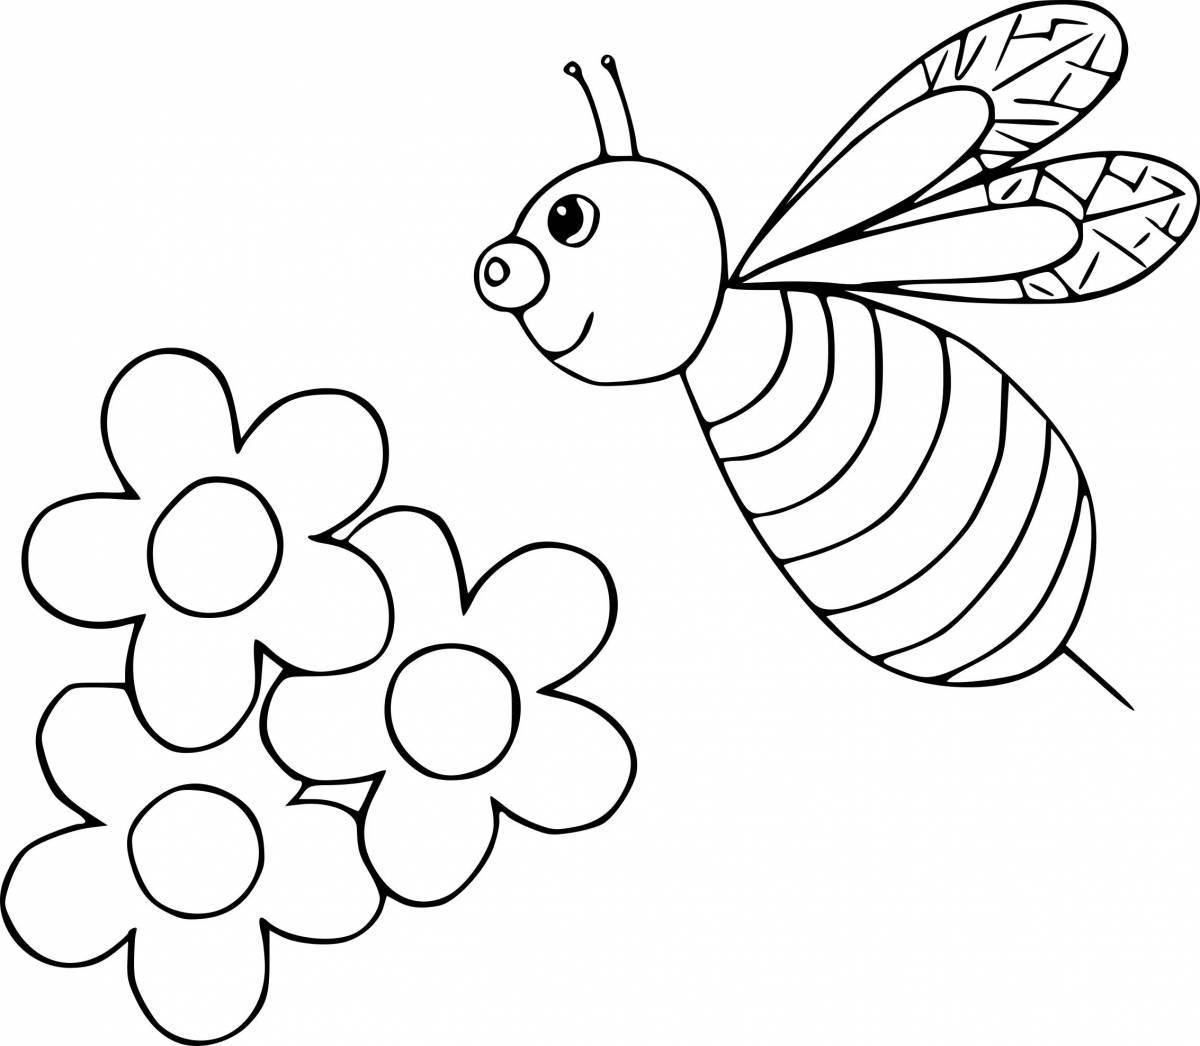 Fancy insect coloring pages for 6-7 year olds